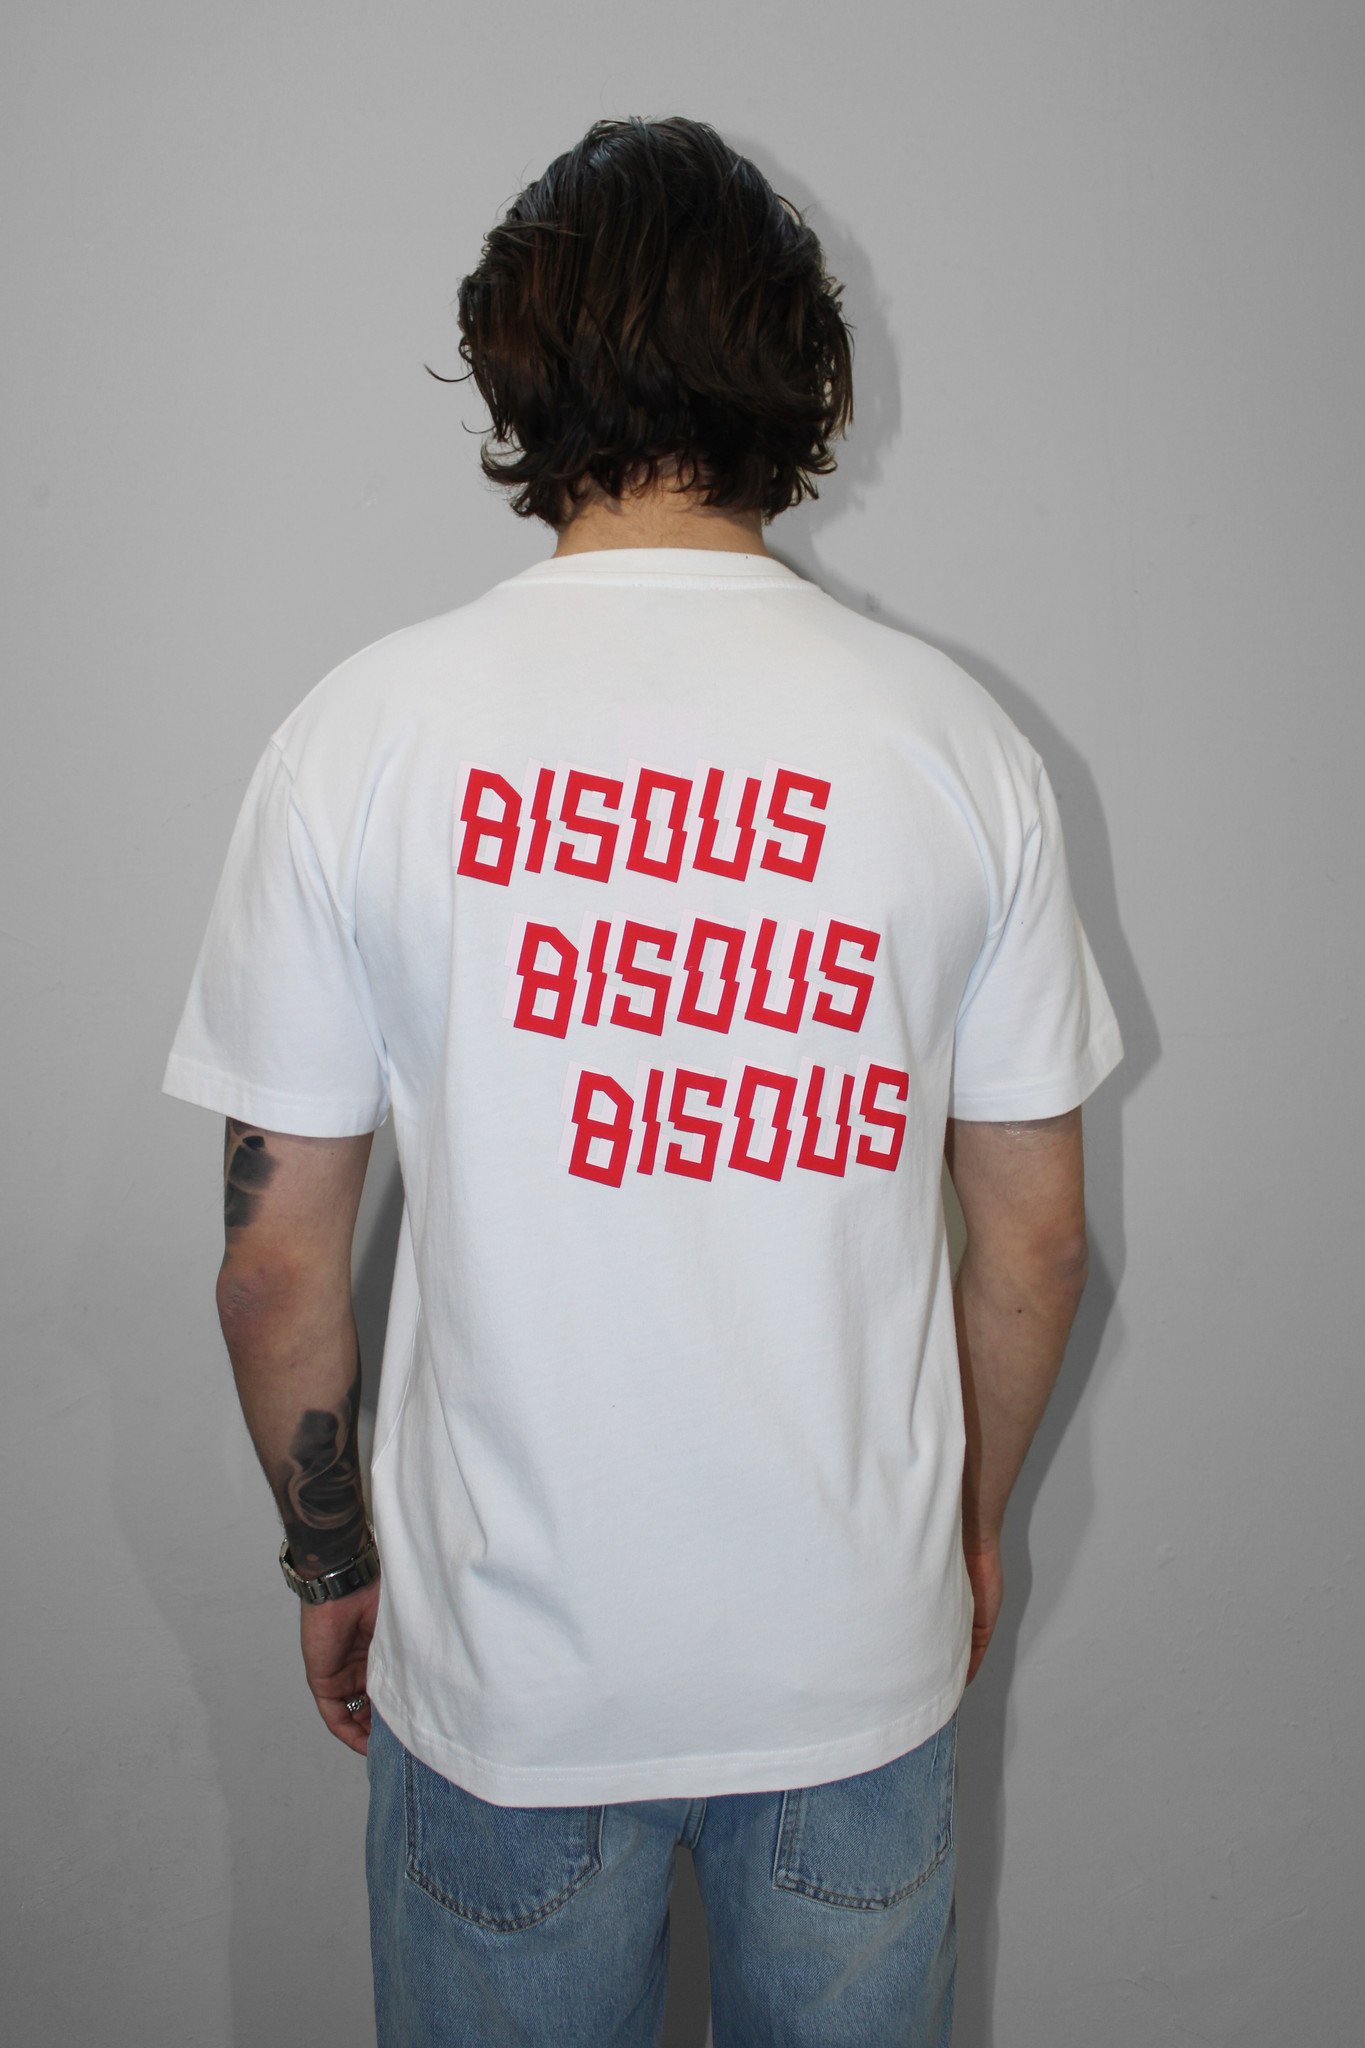 Bisous x3 Back Tee - White Red-3